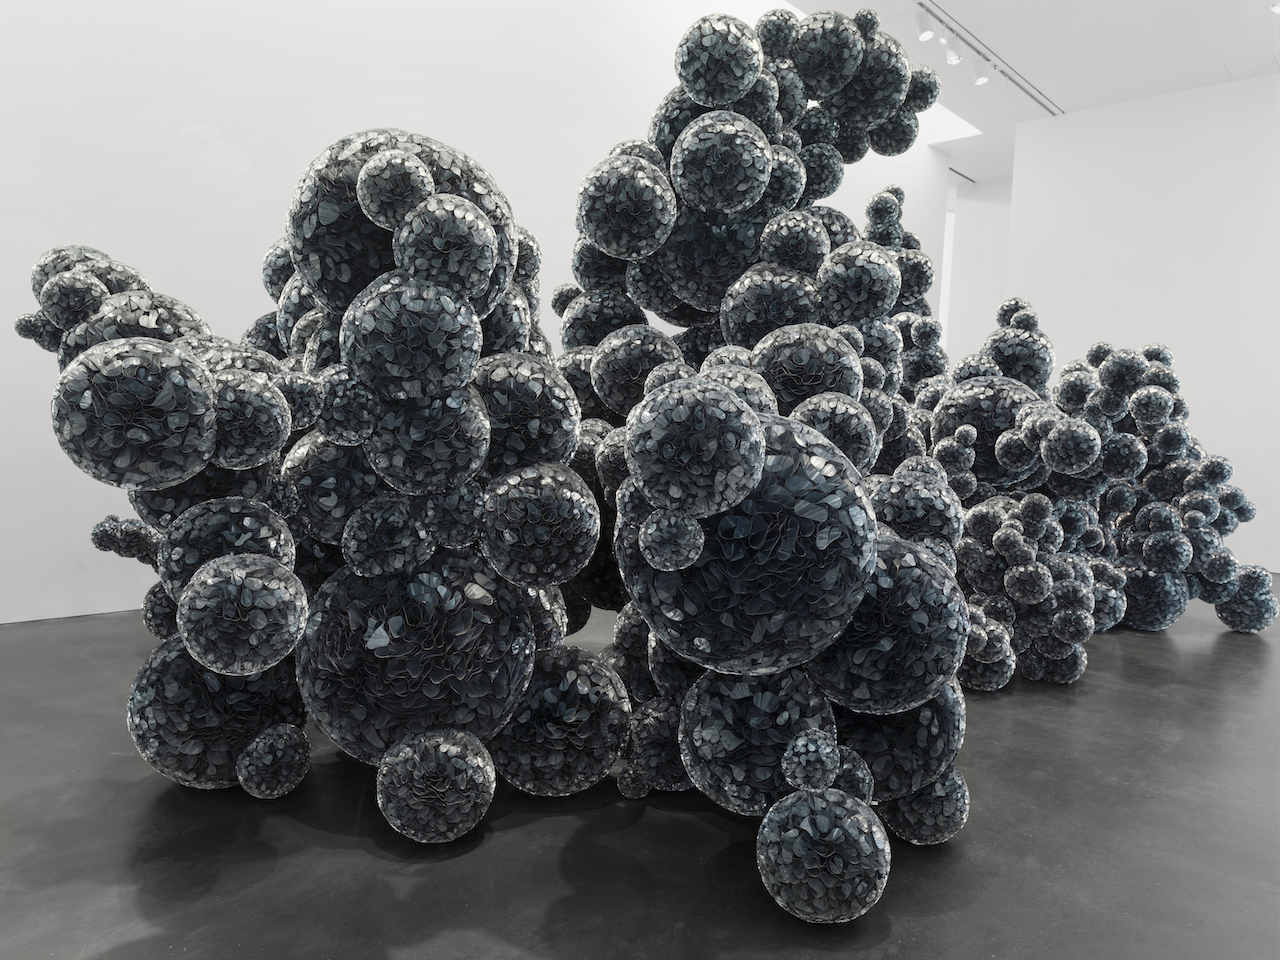 The Wick - Tara Donovan, Untitled (Mylar), 2011/2018. Mylar and hot glue. Dimensions Variable. Installation view, MCA Denver. Photo: Christopher Burke. Courtesy the artist and Pace Gallery.